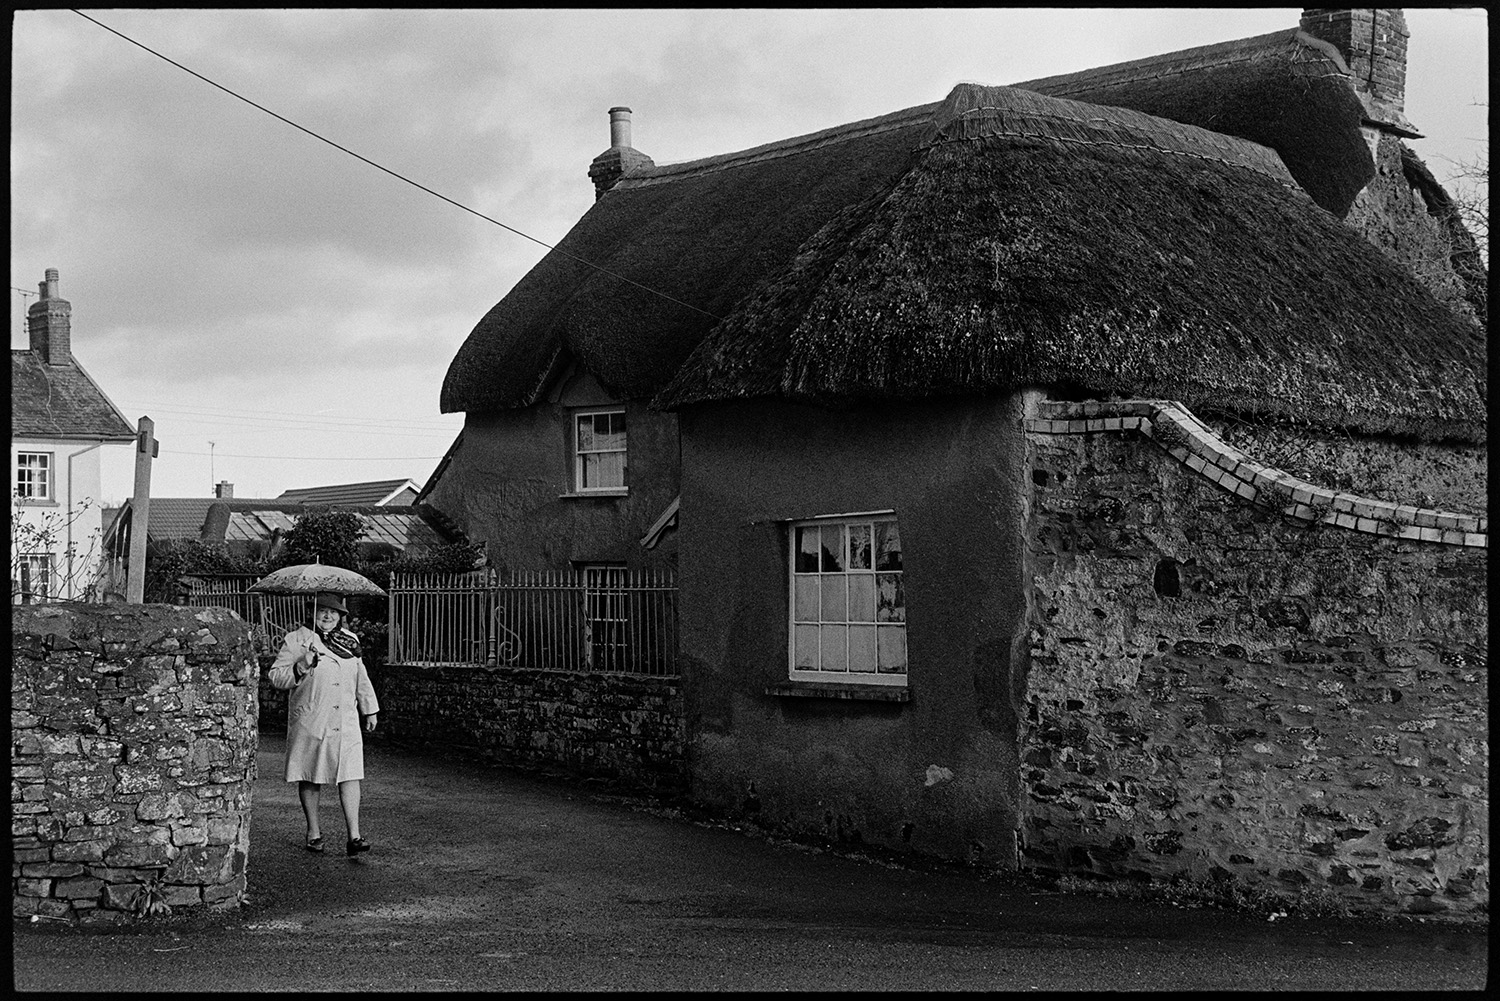 Couple walking past house with porch. 
[A woman walking along West Lane in Dolton holding an umbrella. She is passing a thatched cottage with railings outside.]